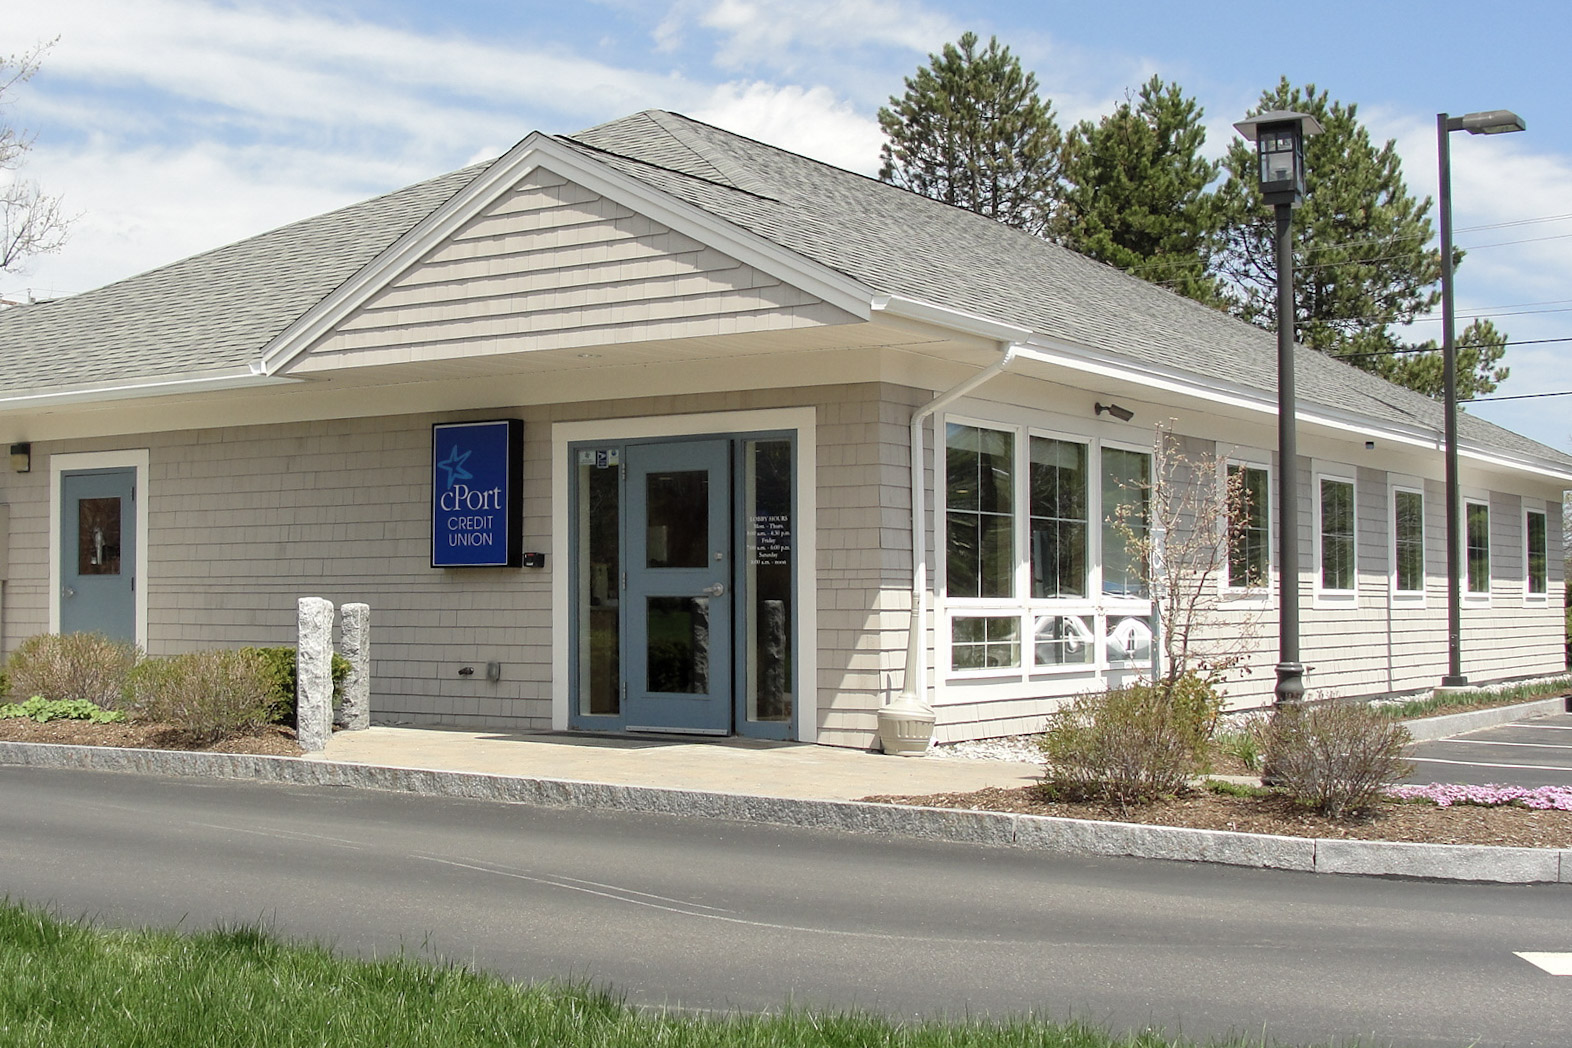 Photo of cPort Credit Union in Scarborough, Maine.